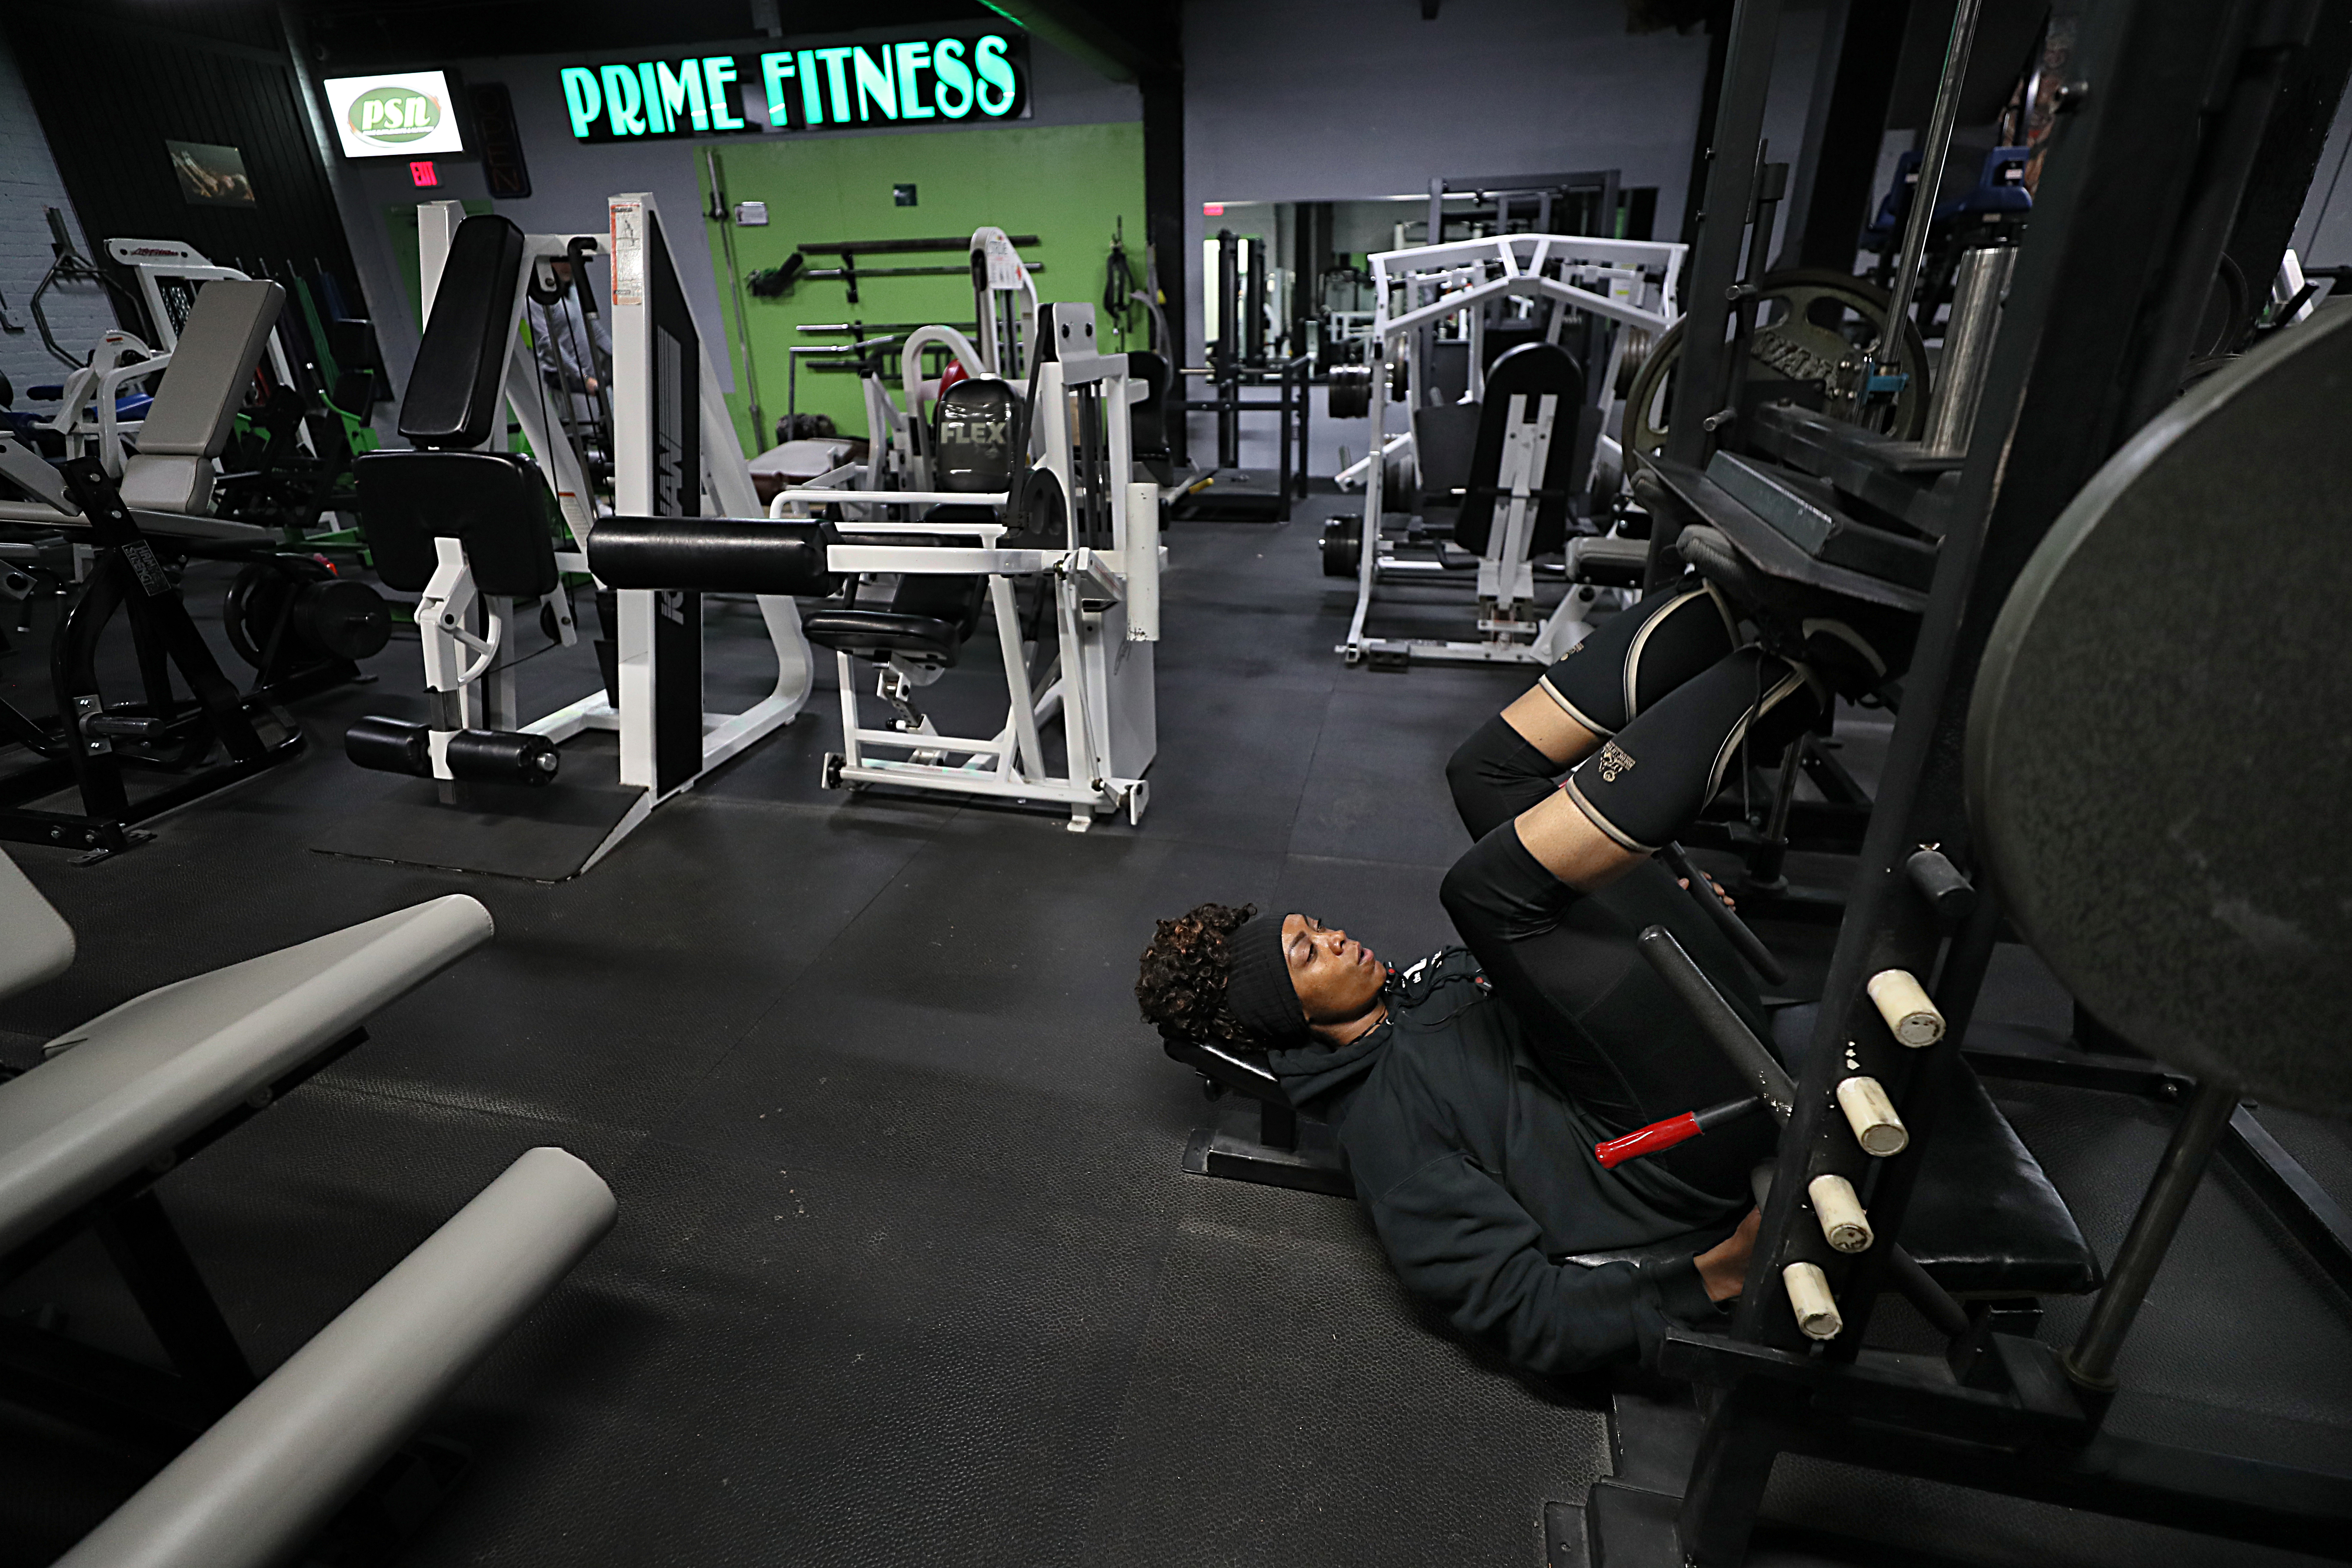 Gym owner in Oxford defies state orders, reopens ahead of schedule - The  Boston Globe